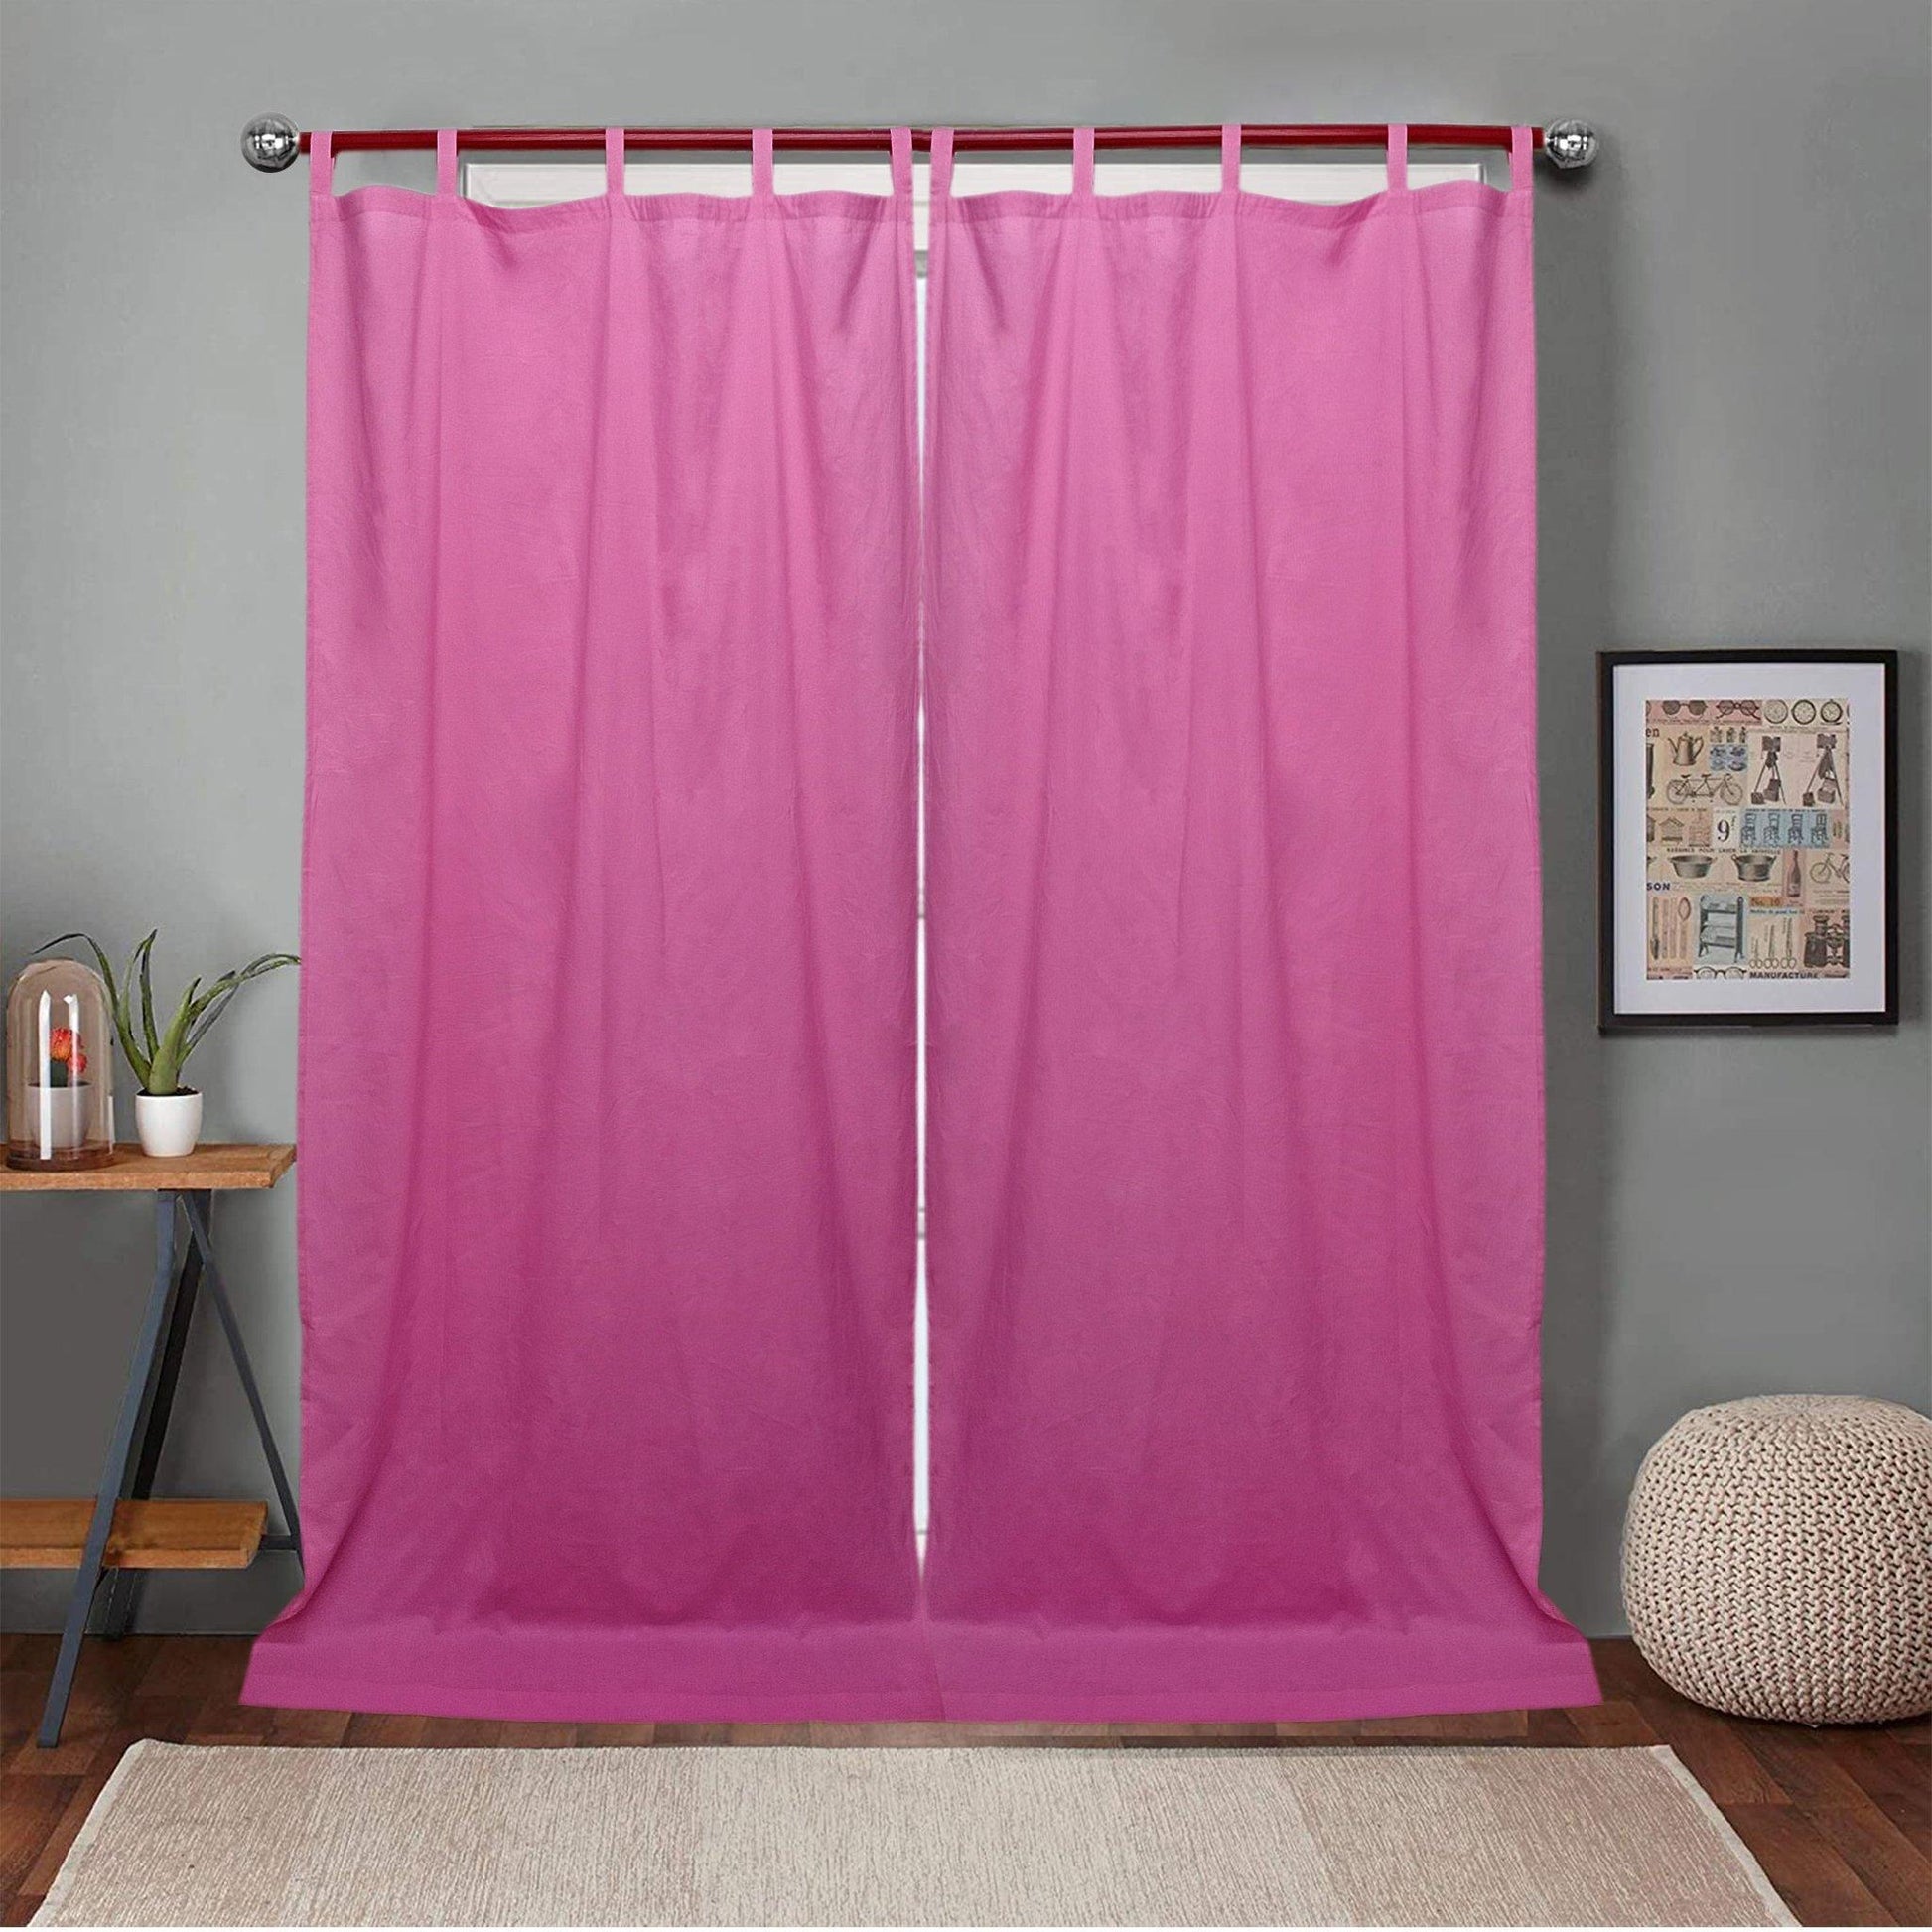 Solid Pink Voile Curtain Pair - The Teal Thread